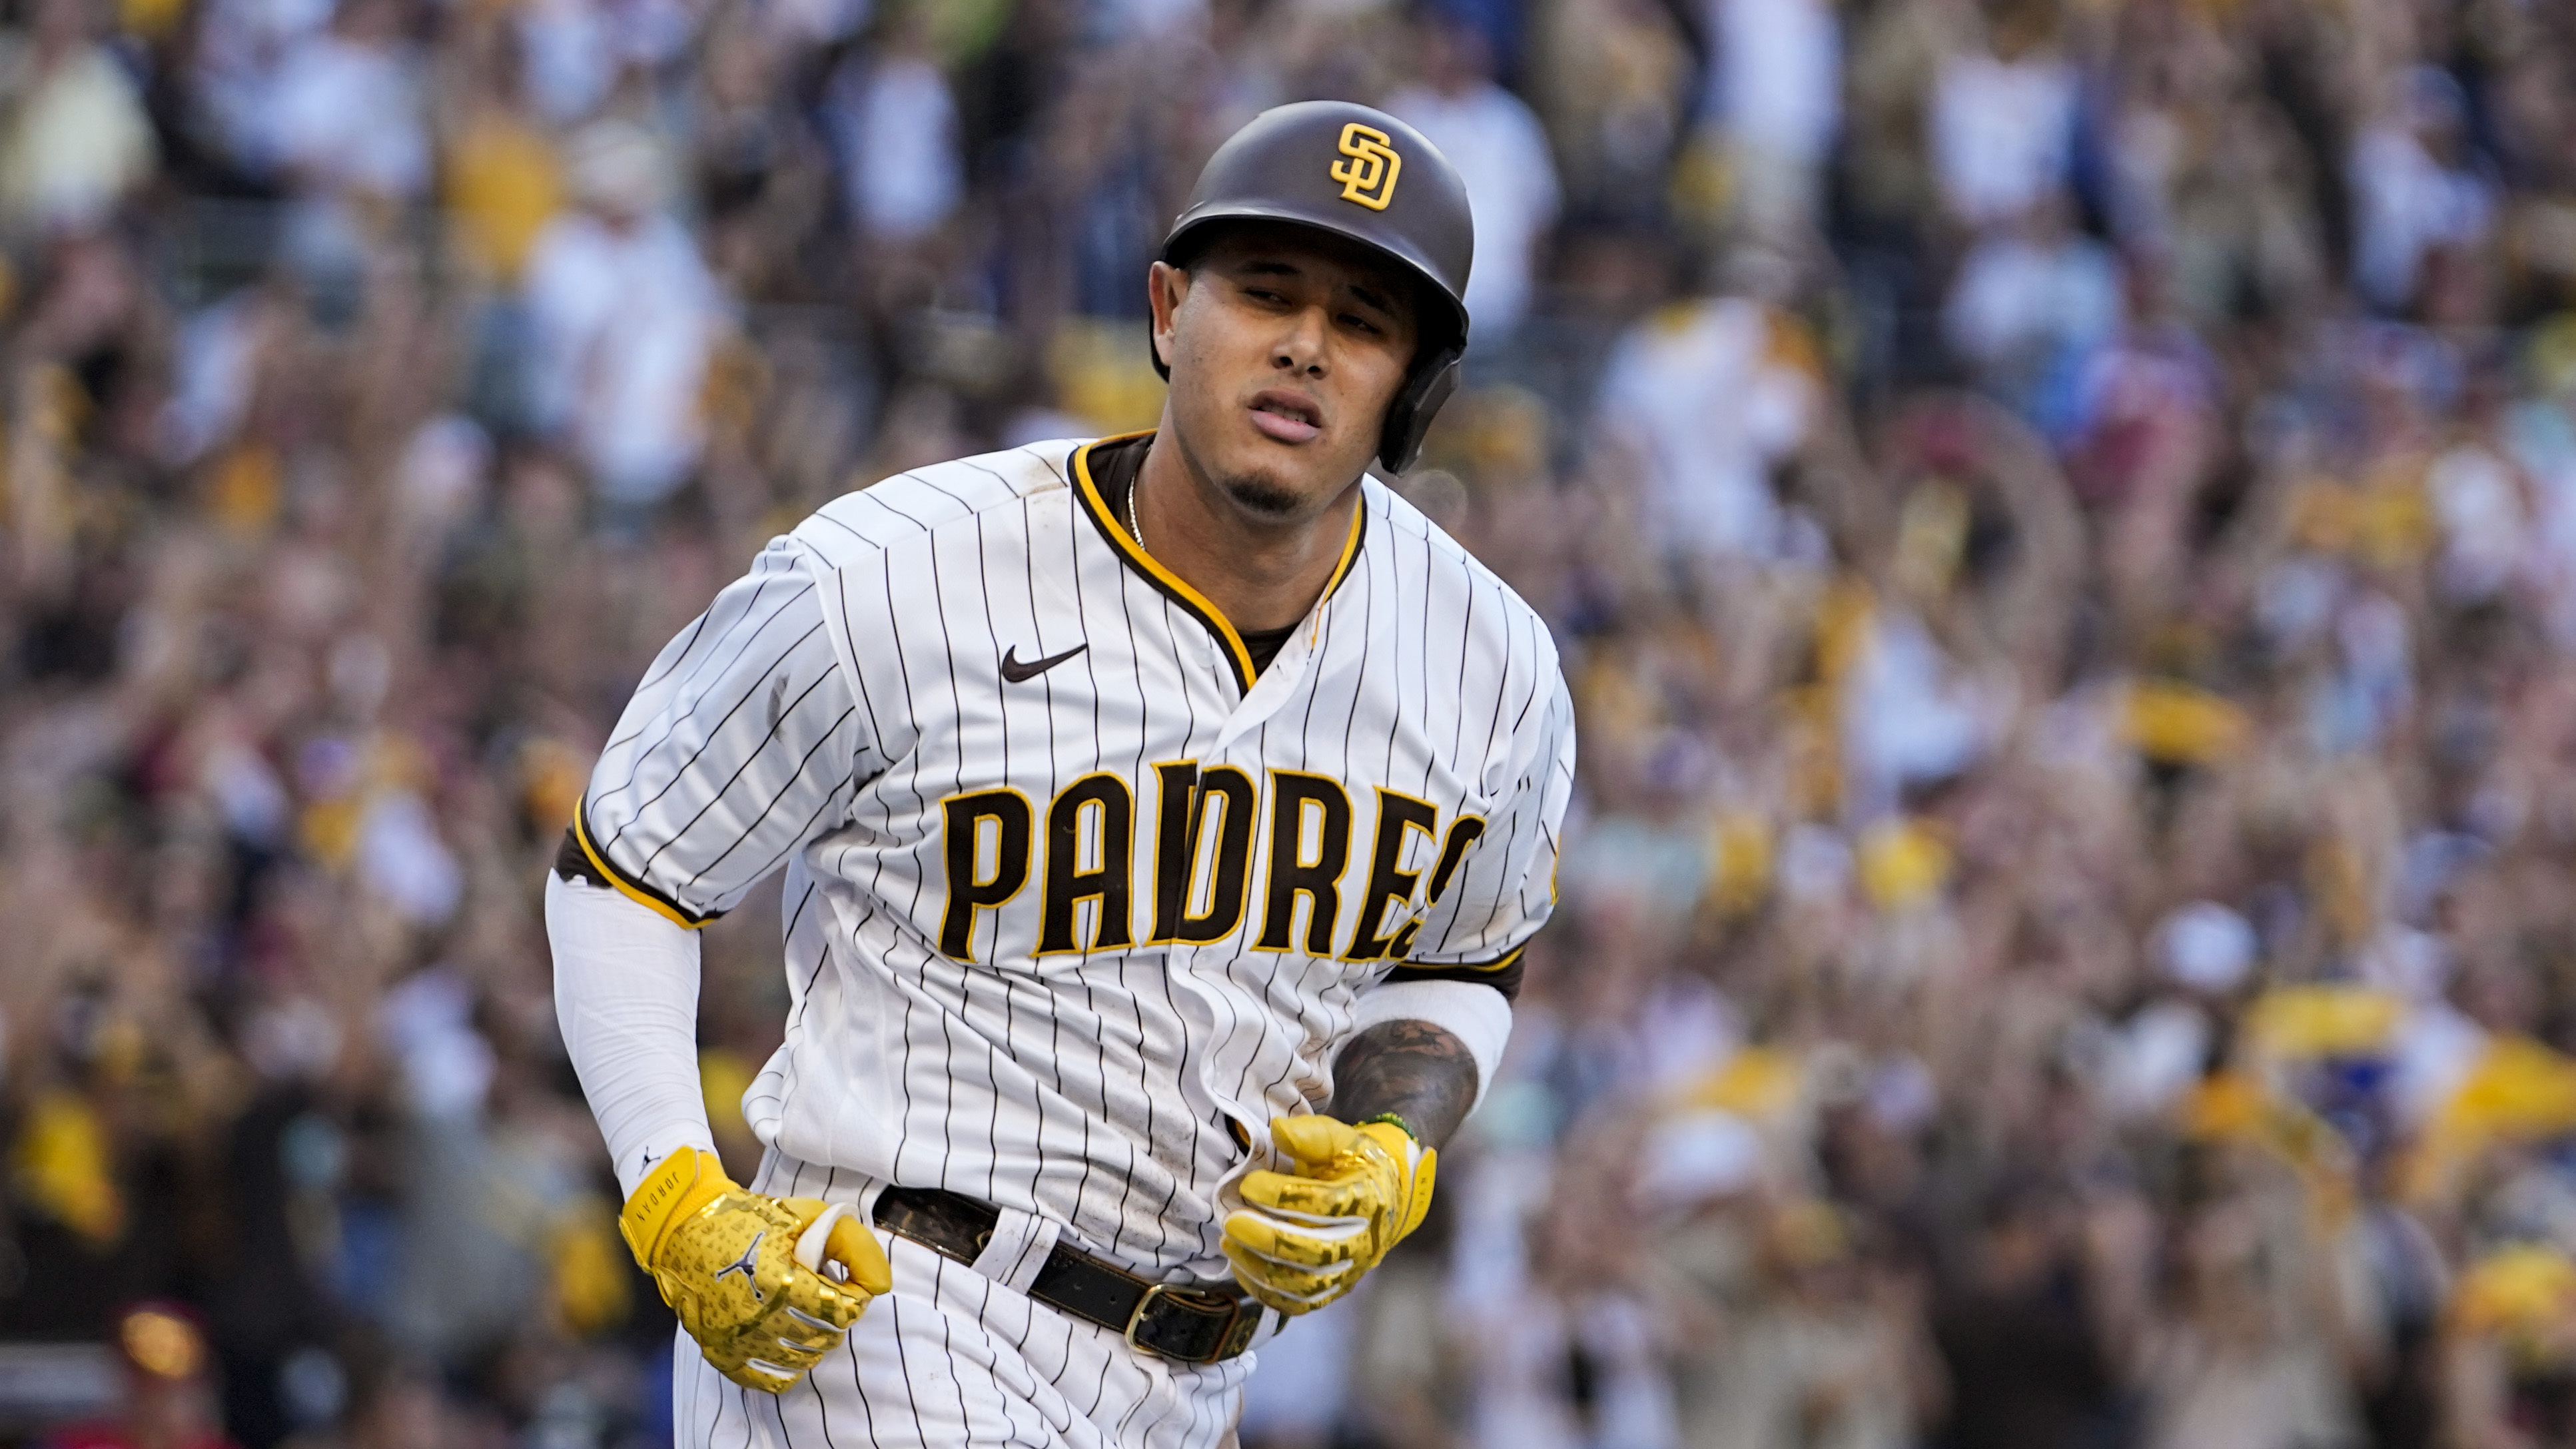 Manny Machado's possible opt out looming for Padres